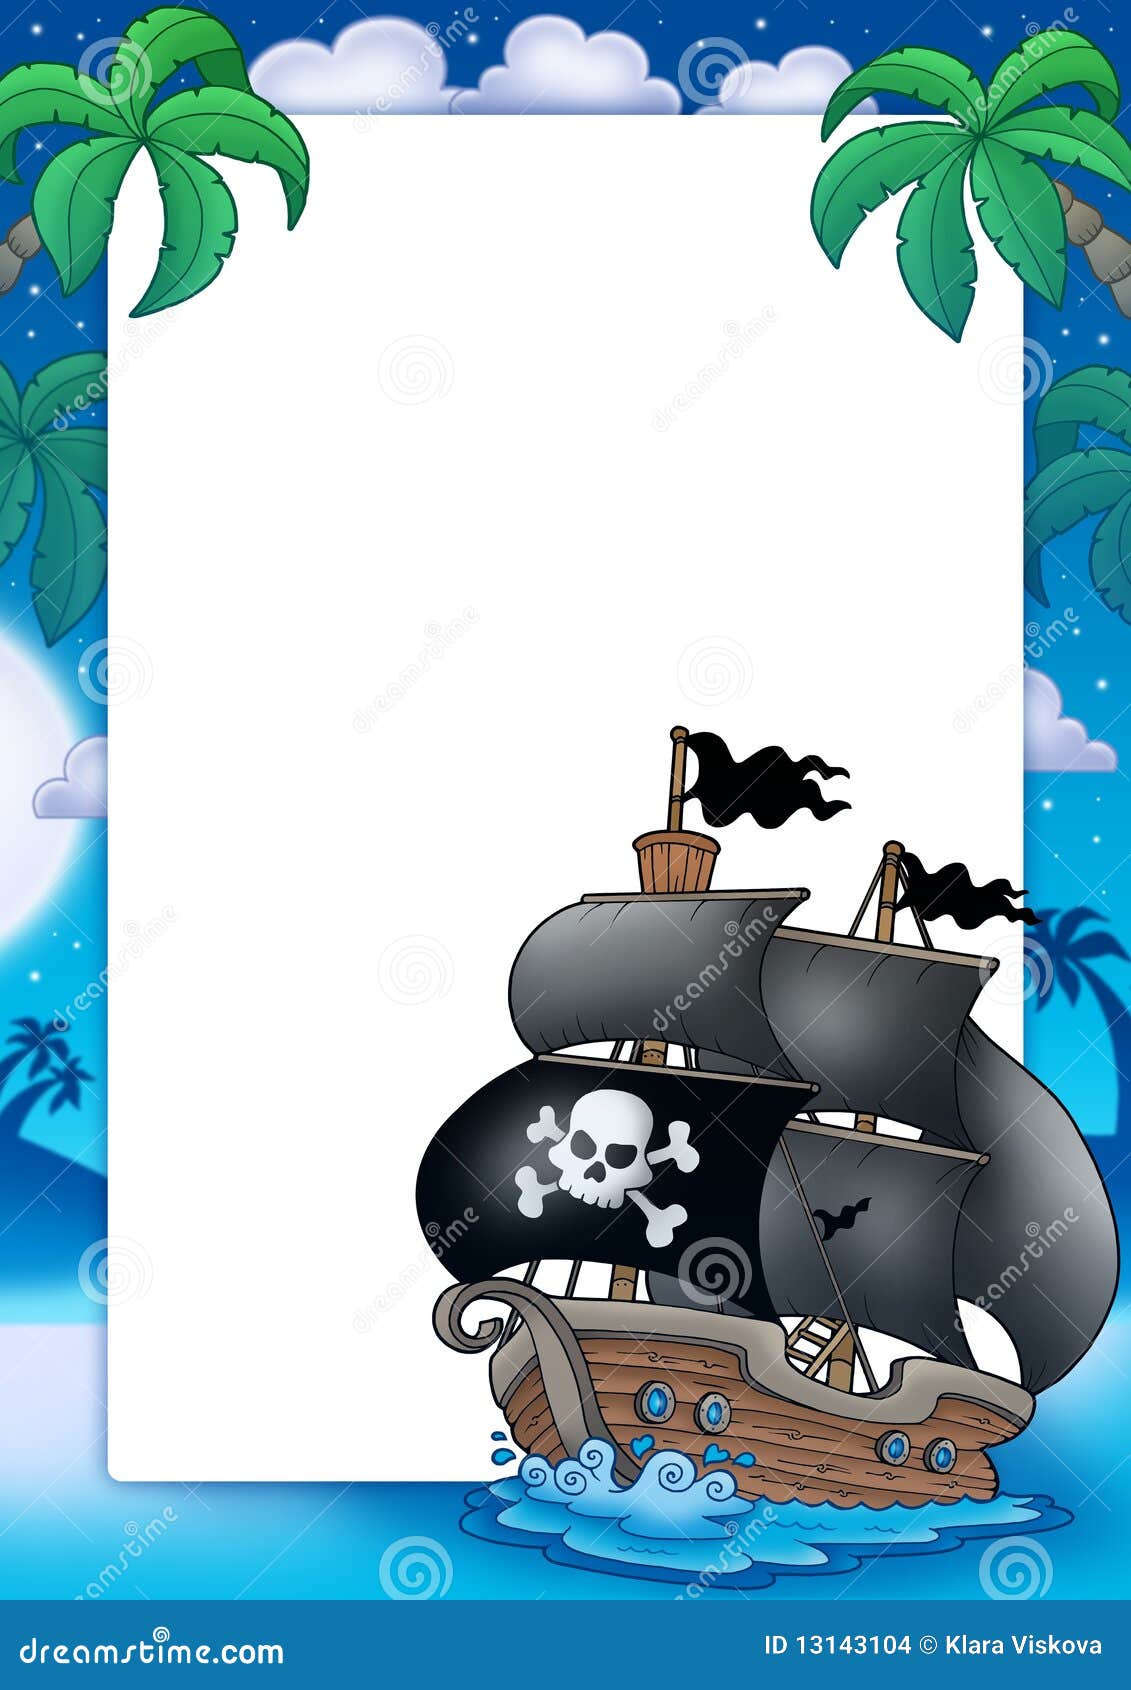 Pirate Frame With Sailboat At Night Stock Illustration - Image: 13143104